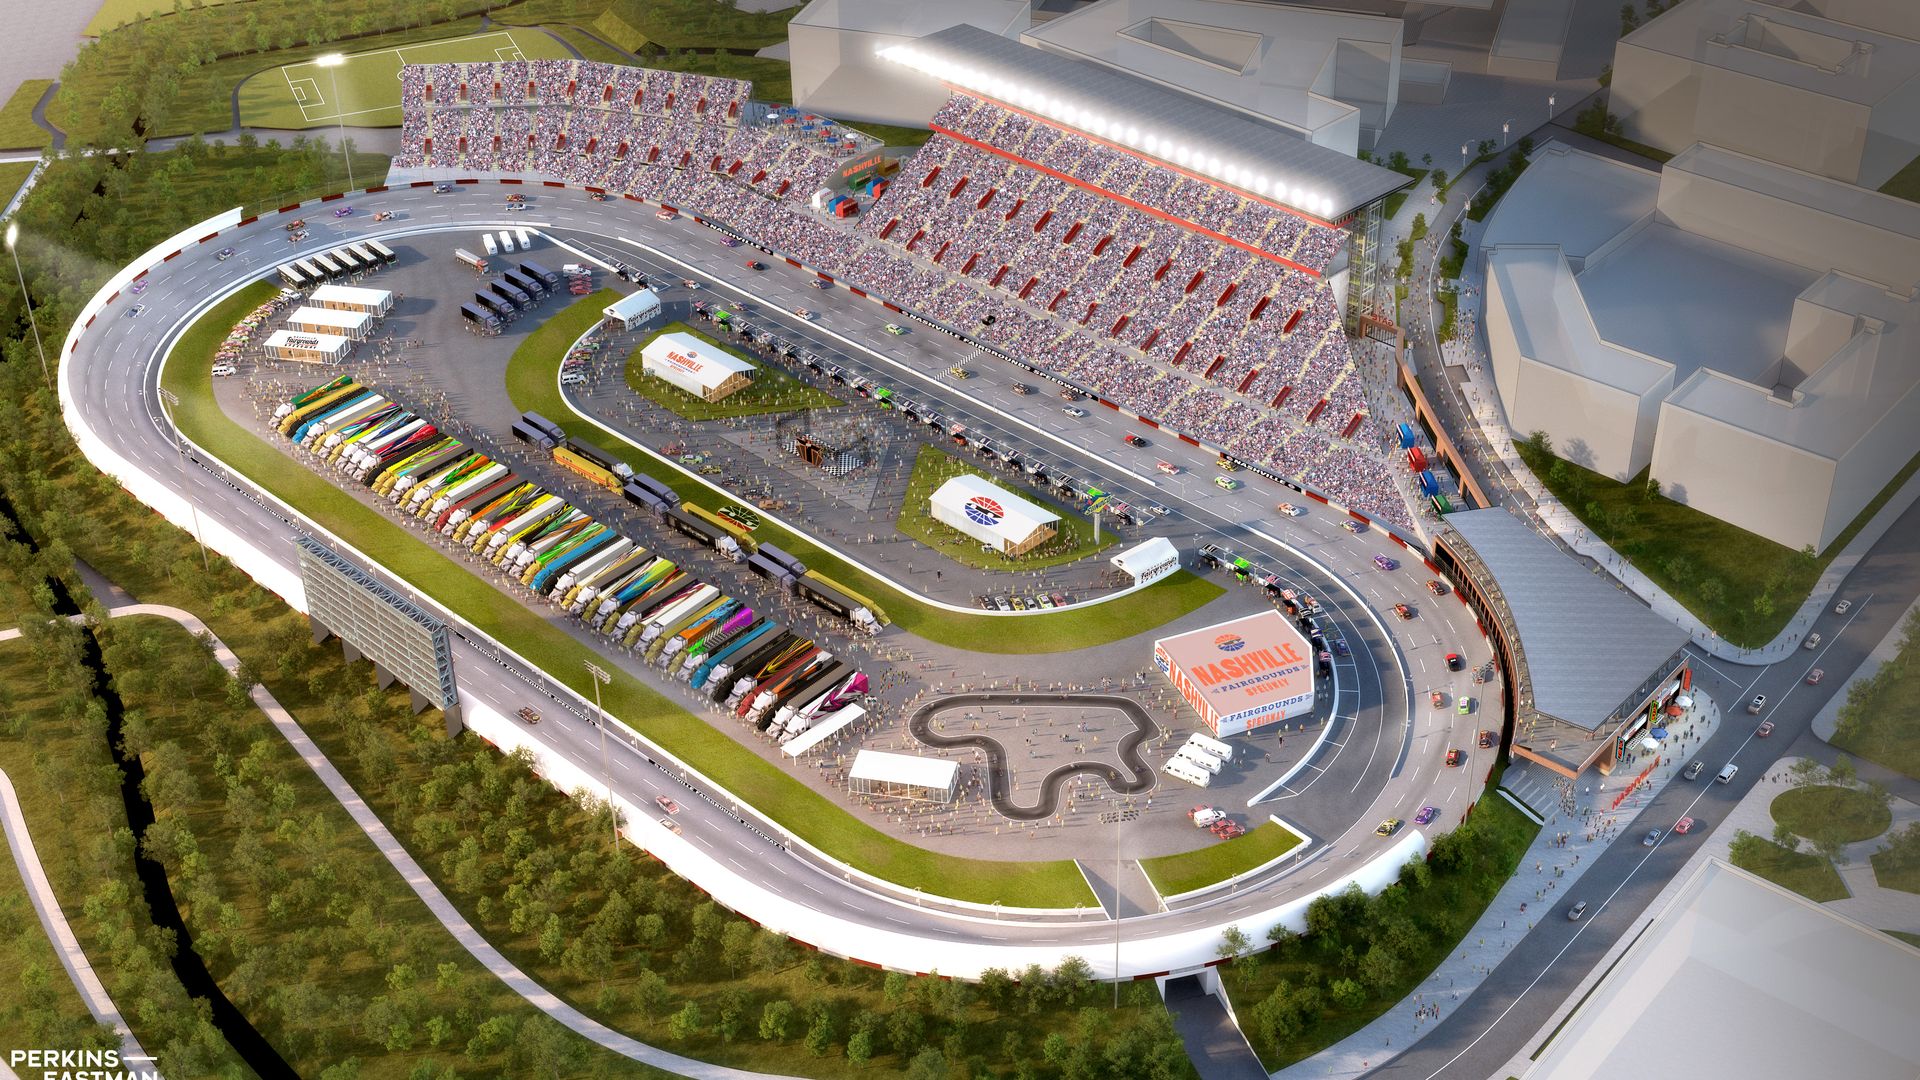 An aerial image showing proposed renovations to the Nashville racetrack, with stands that can accommodate thousands.